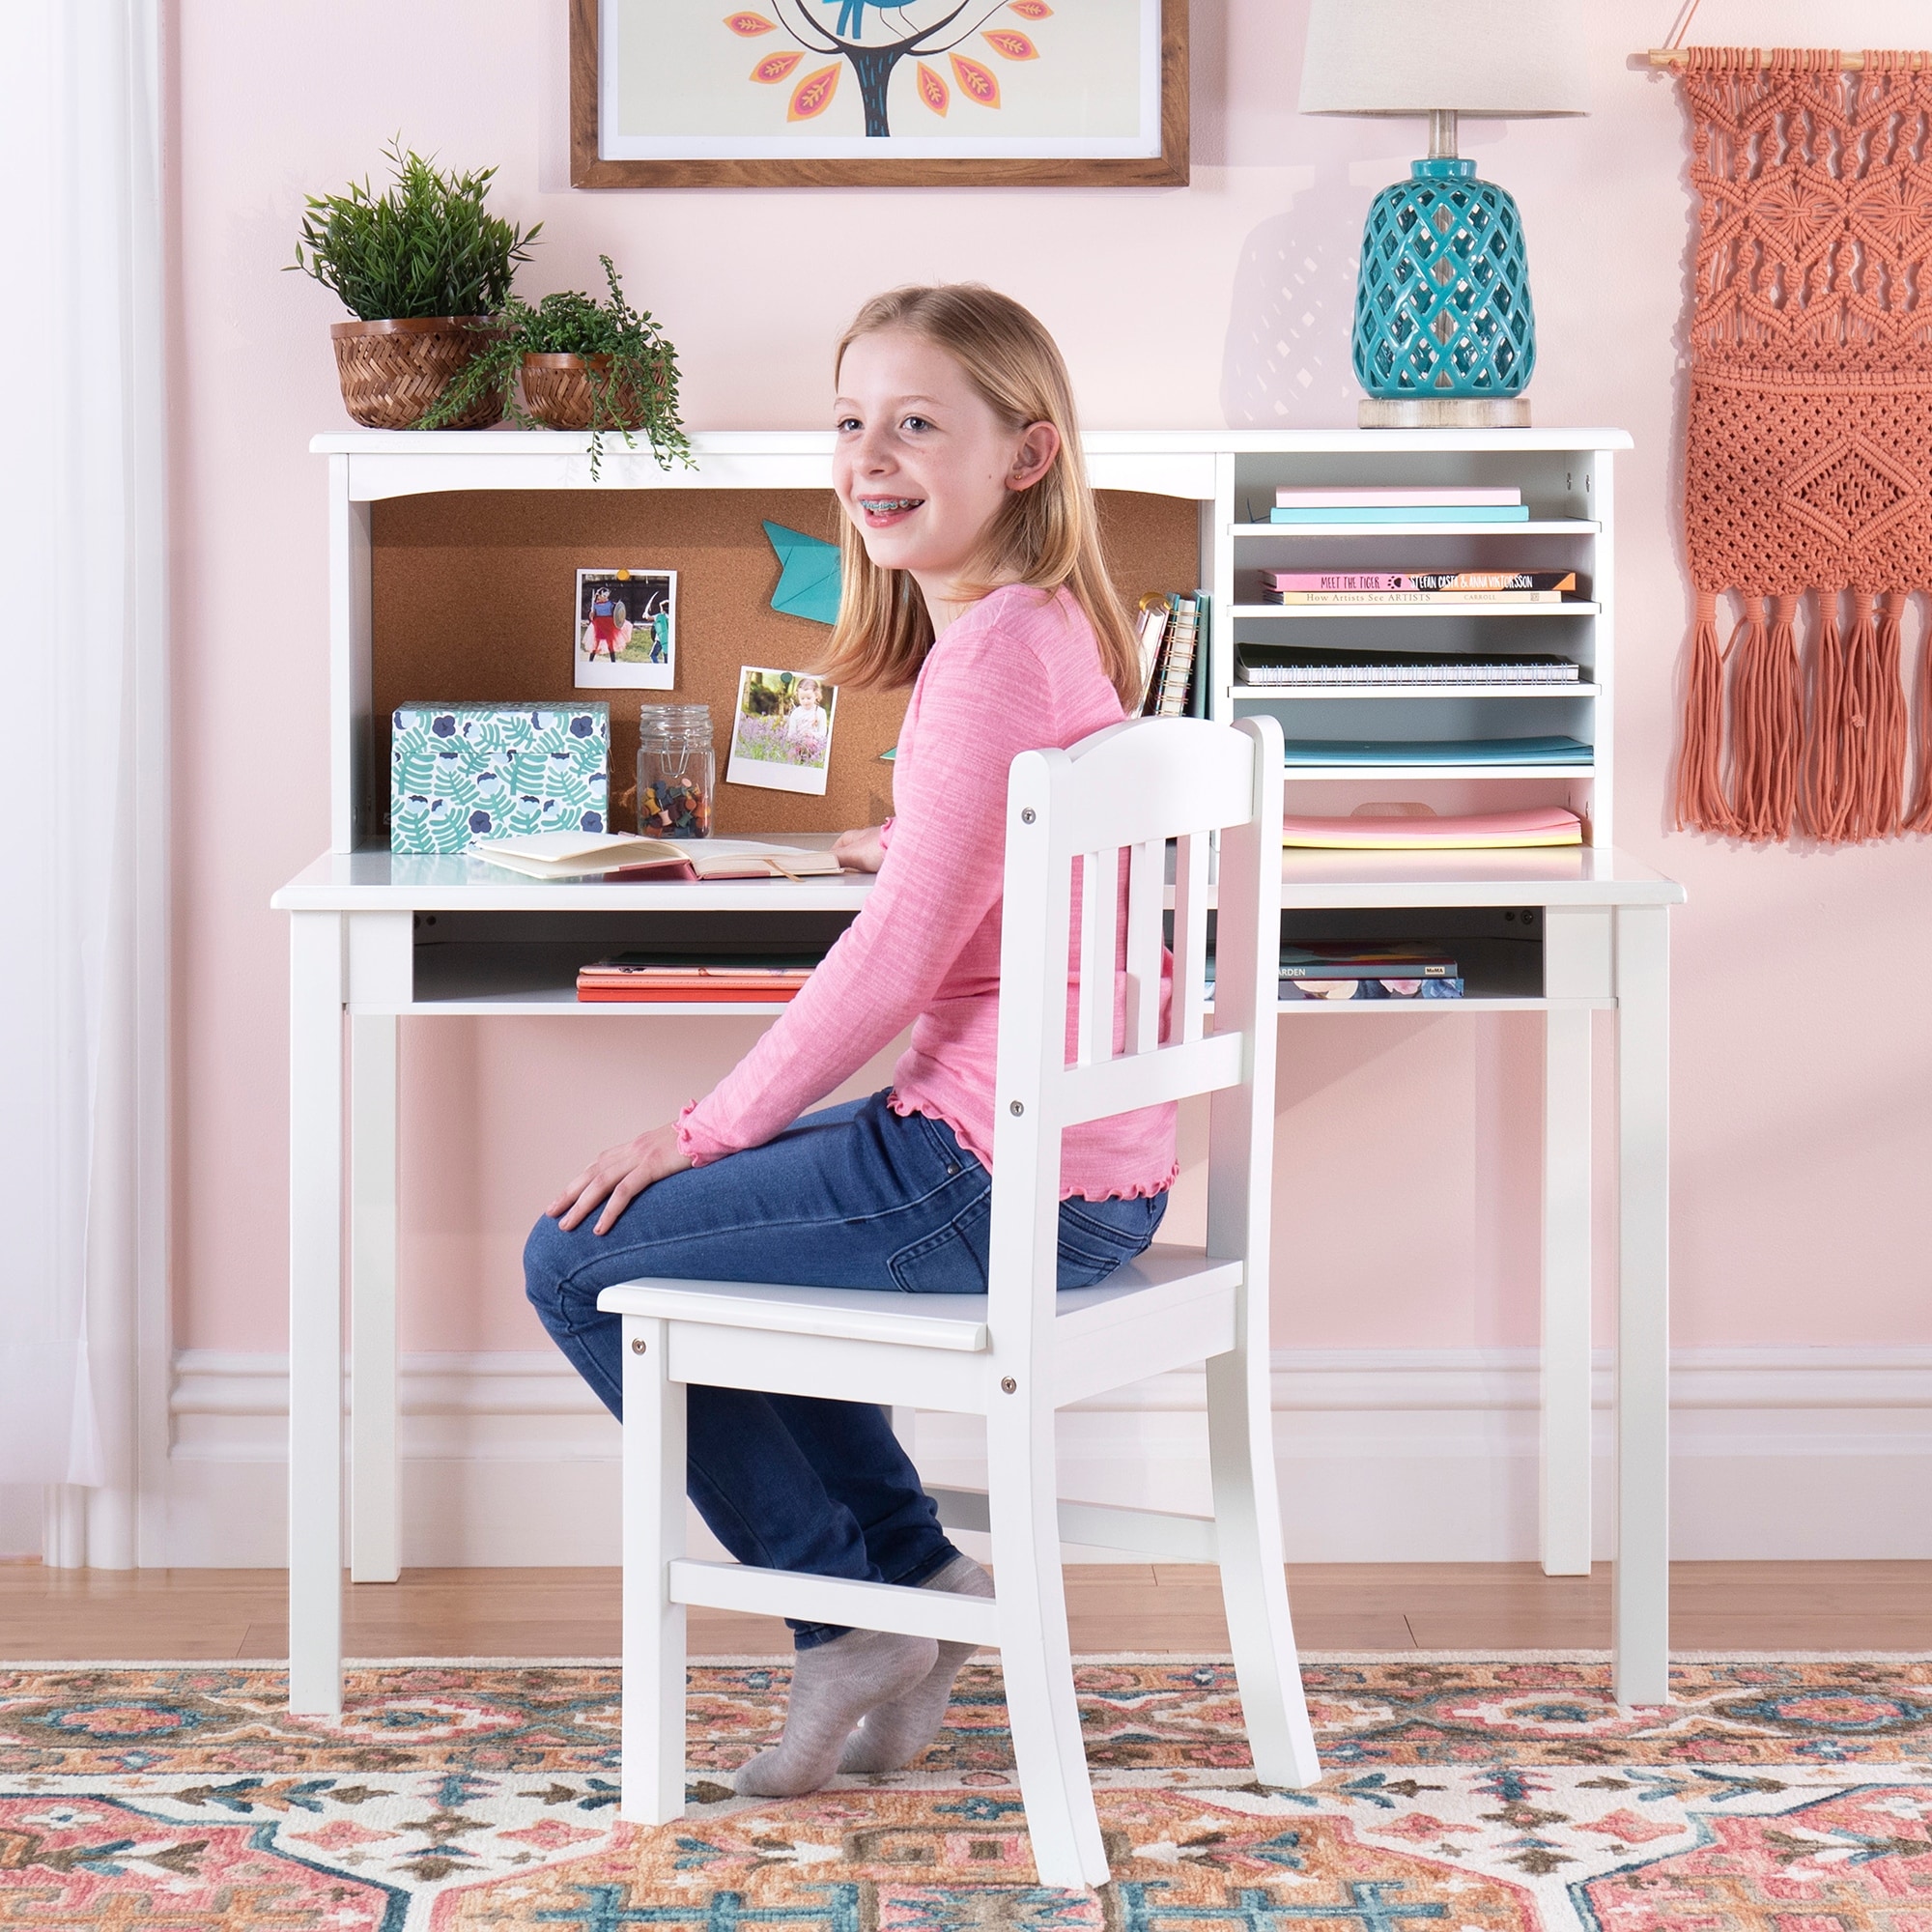 Martha Stewart Living and Learning Kids' Art Table and Stool Set - White